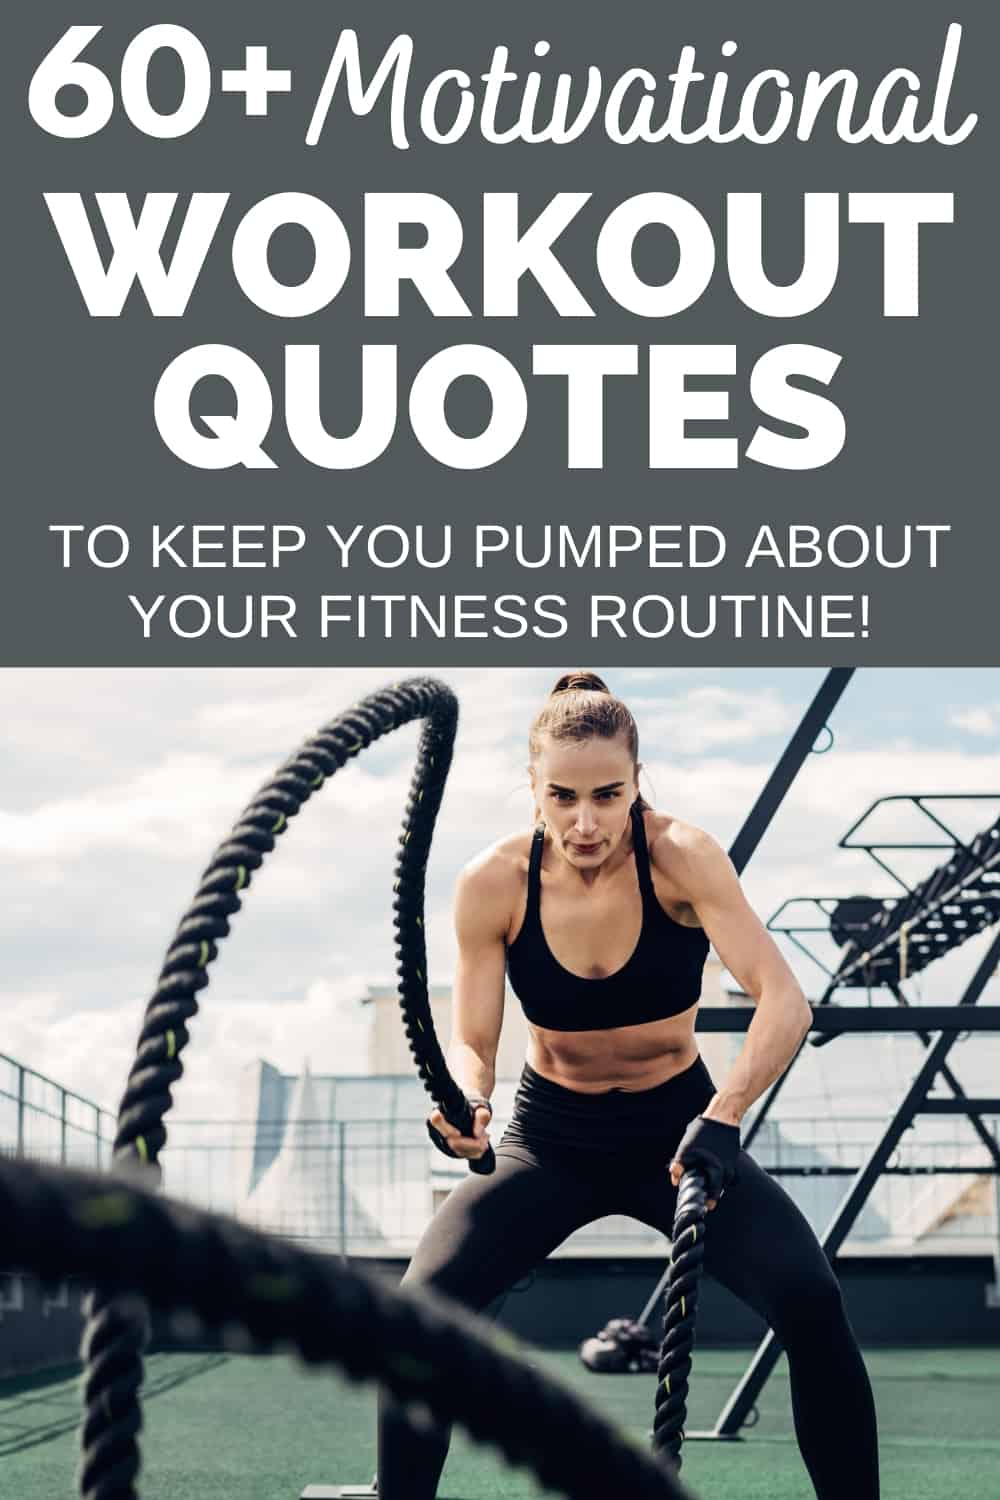 A woman using battle ropes with a text overlay that says 60+ motivational workout quotes.